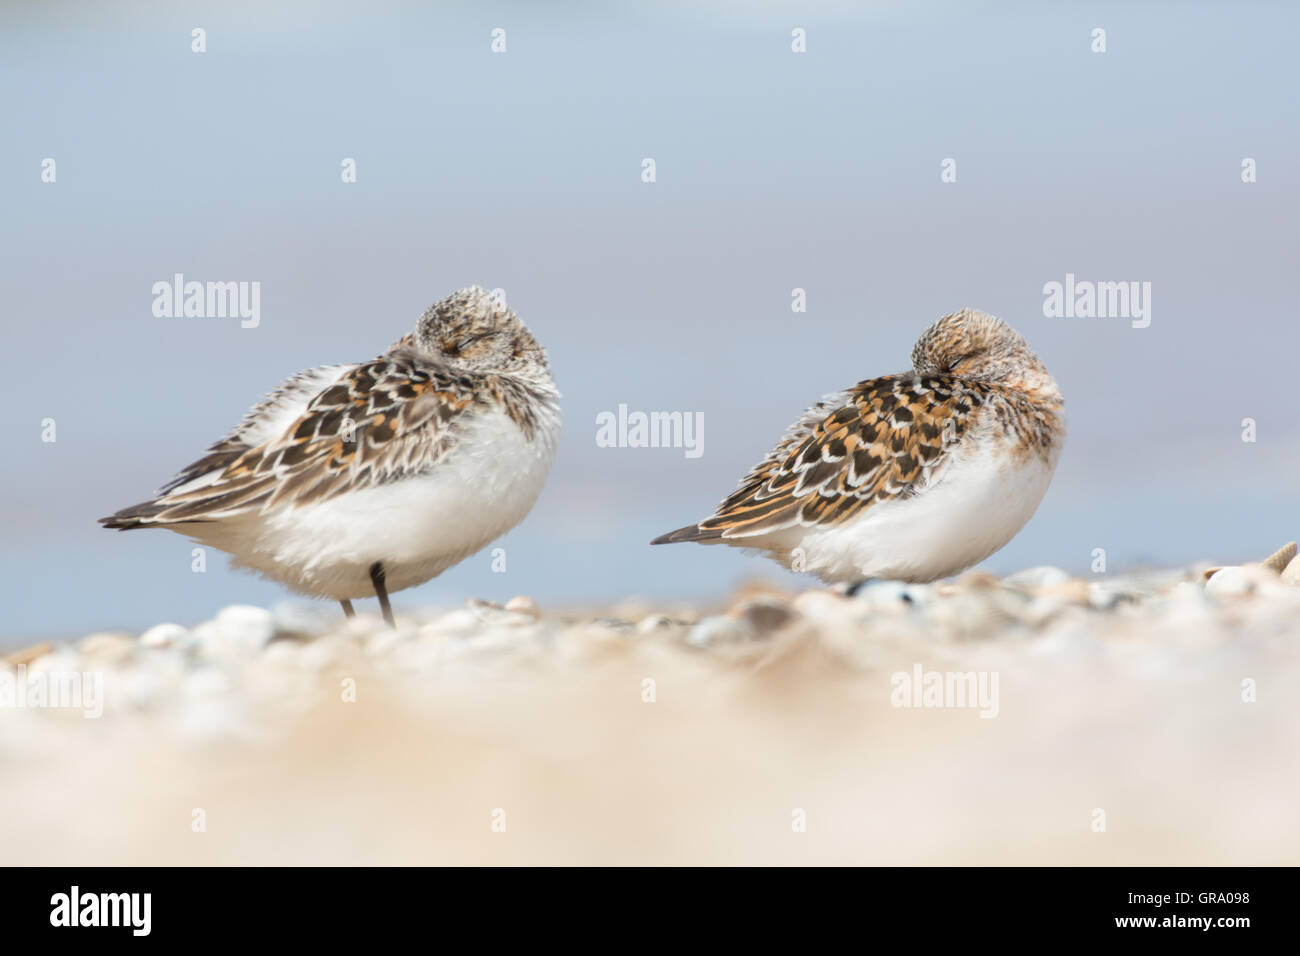 Two Sanderlings Are Standing On One Leg On The Beach And Are Hiding Their Head In The Plumage Stock Photo